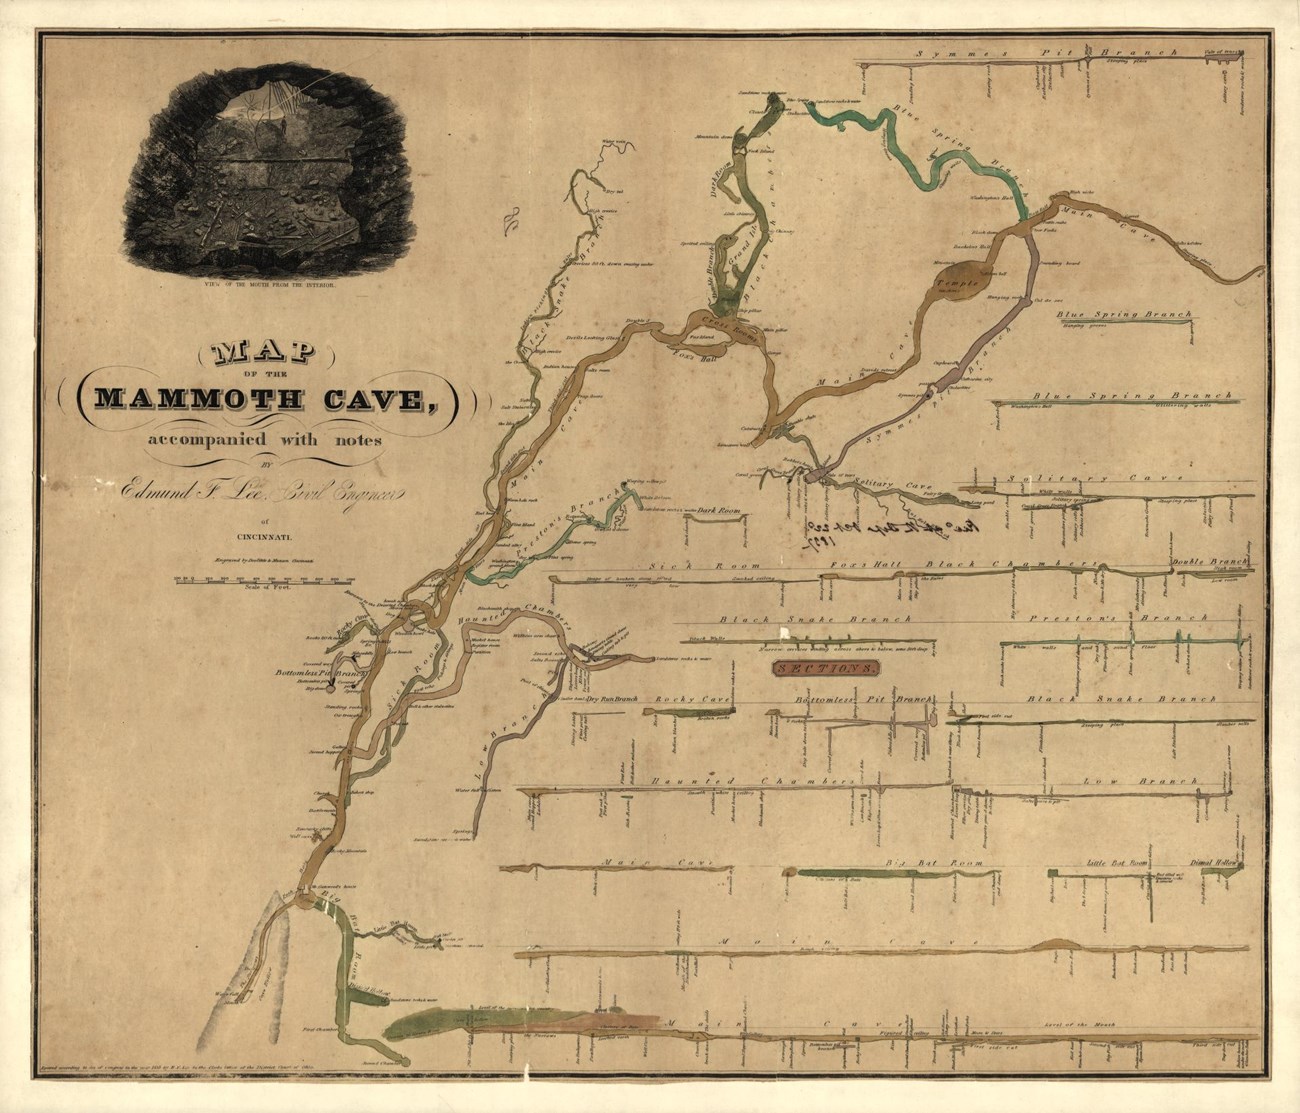 Hand drawn map of Mammoth Cave system in 1835, with reliefs shown in profile